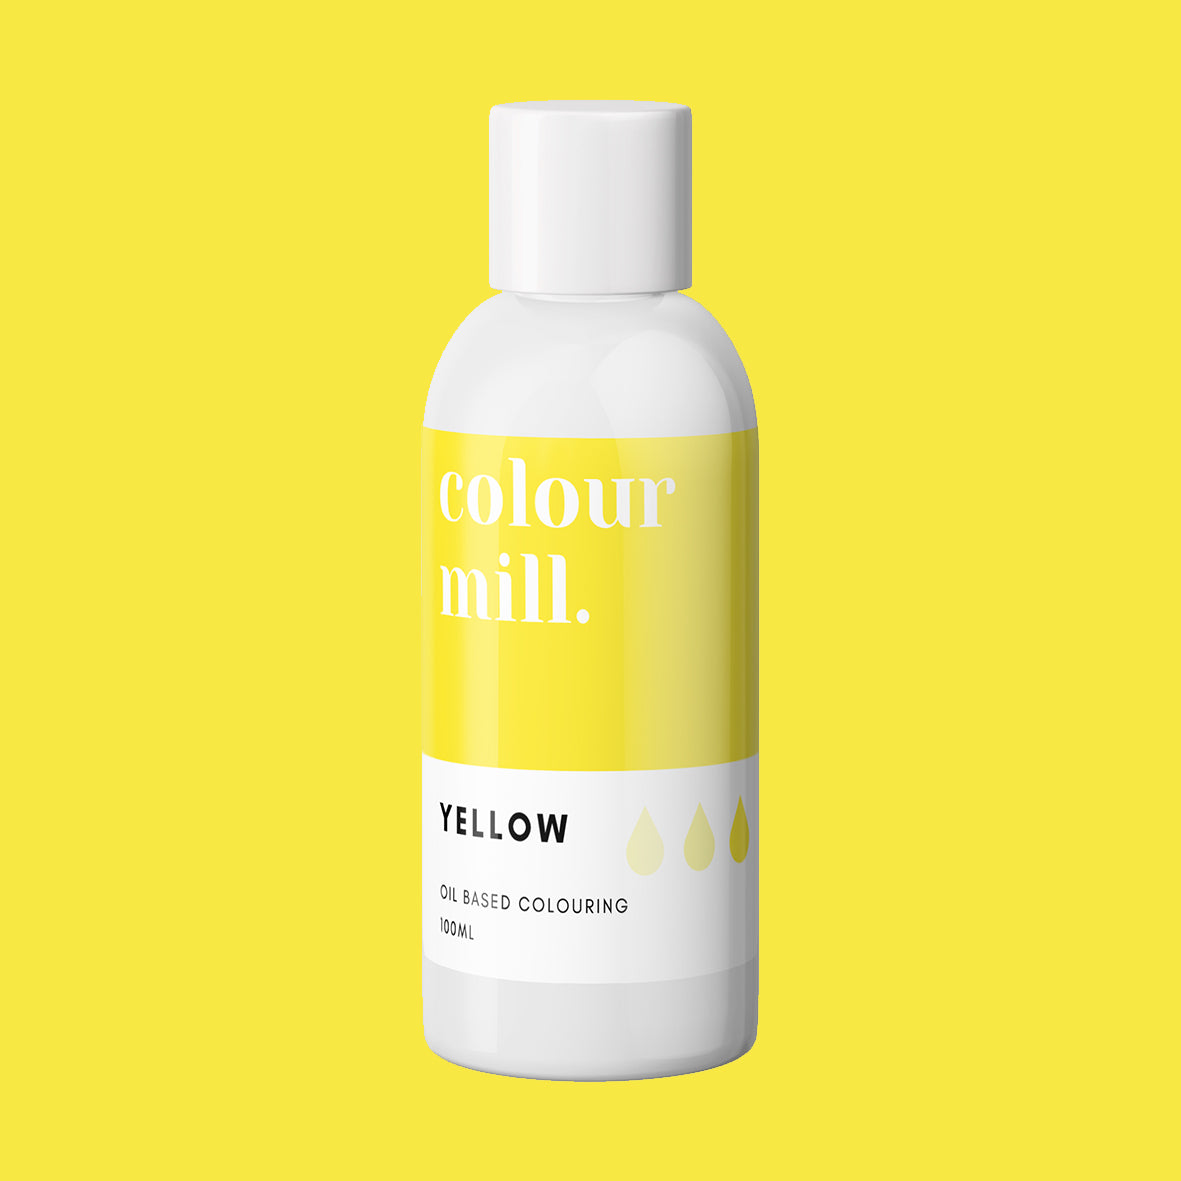 YELLOW oil based concentrated icing colouring 100ml